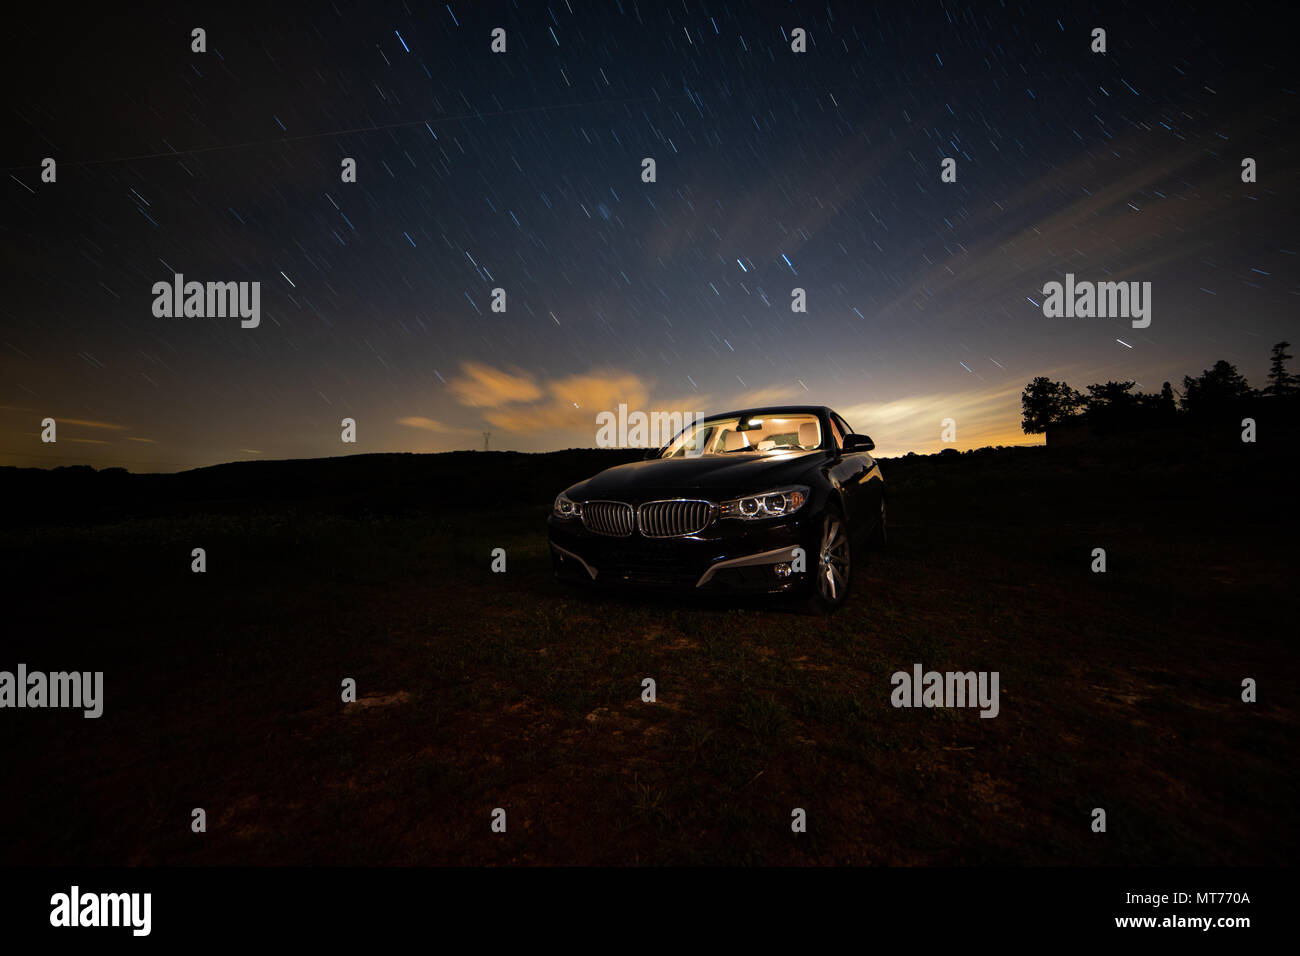 Long Night Photography Of A Car With White Color Illuminated